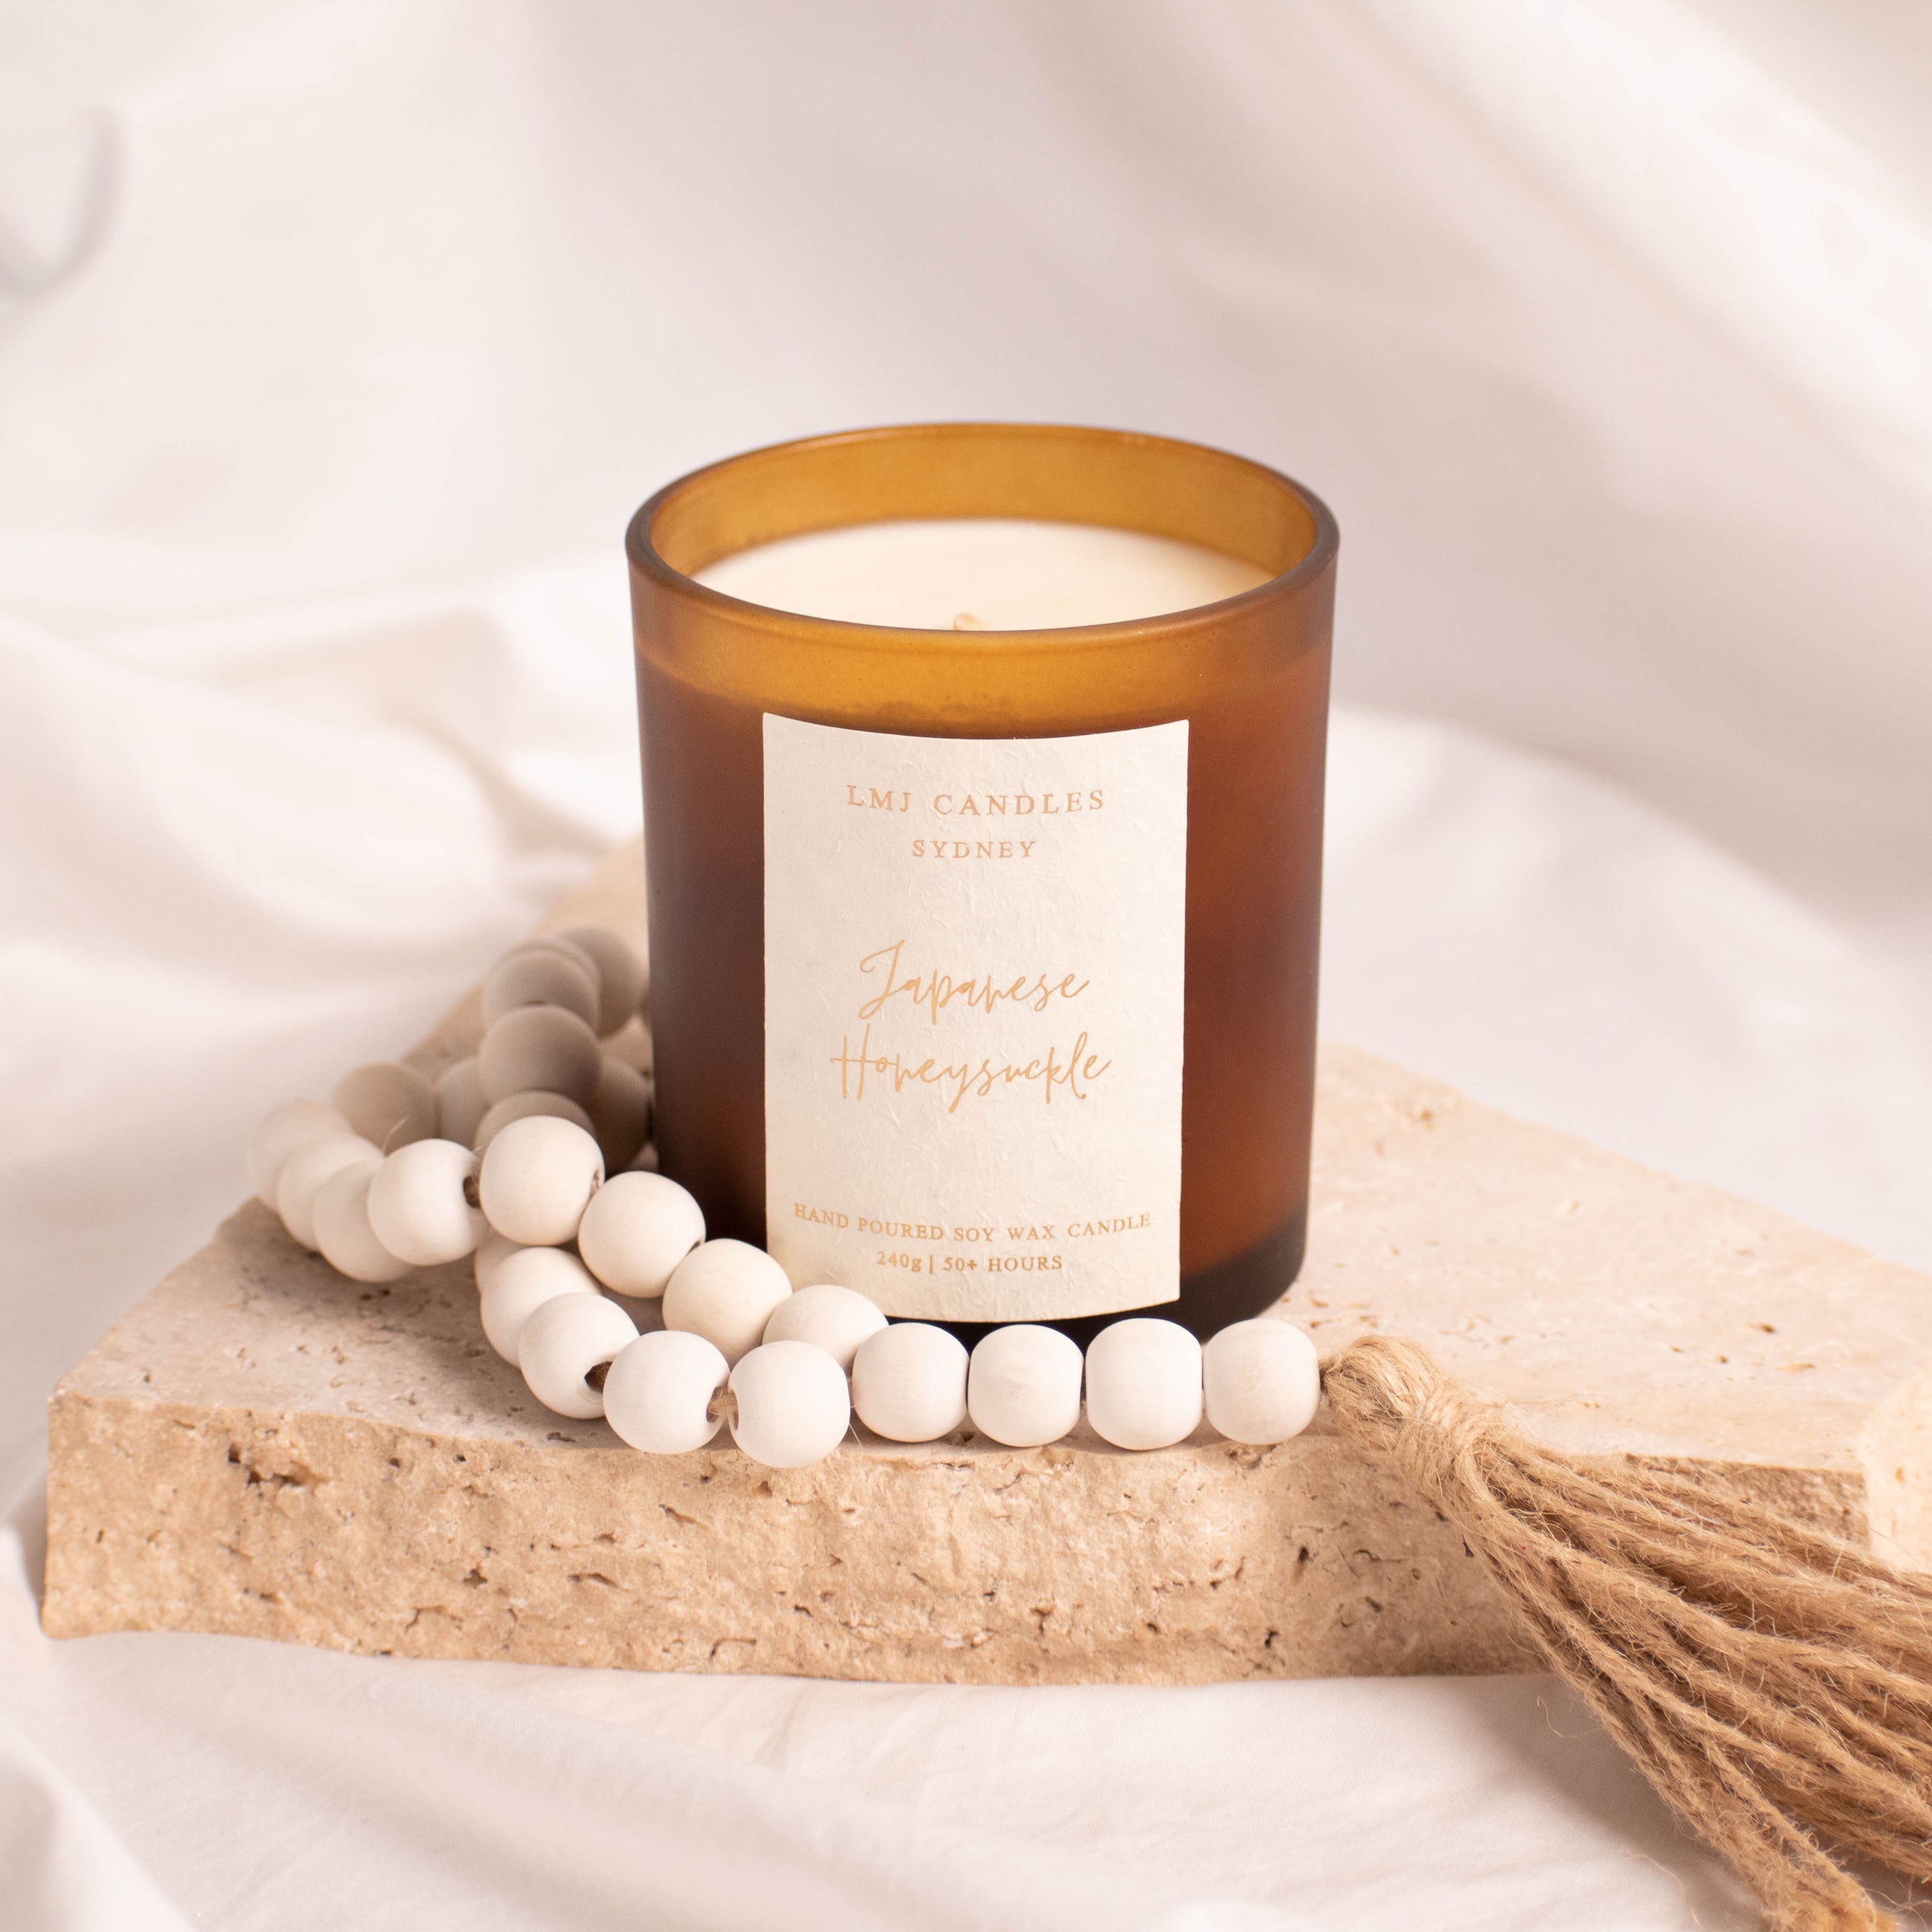 amber glass jar candles, soy wax candles by LMJ Candles